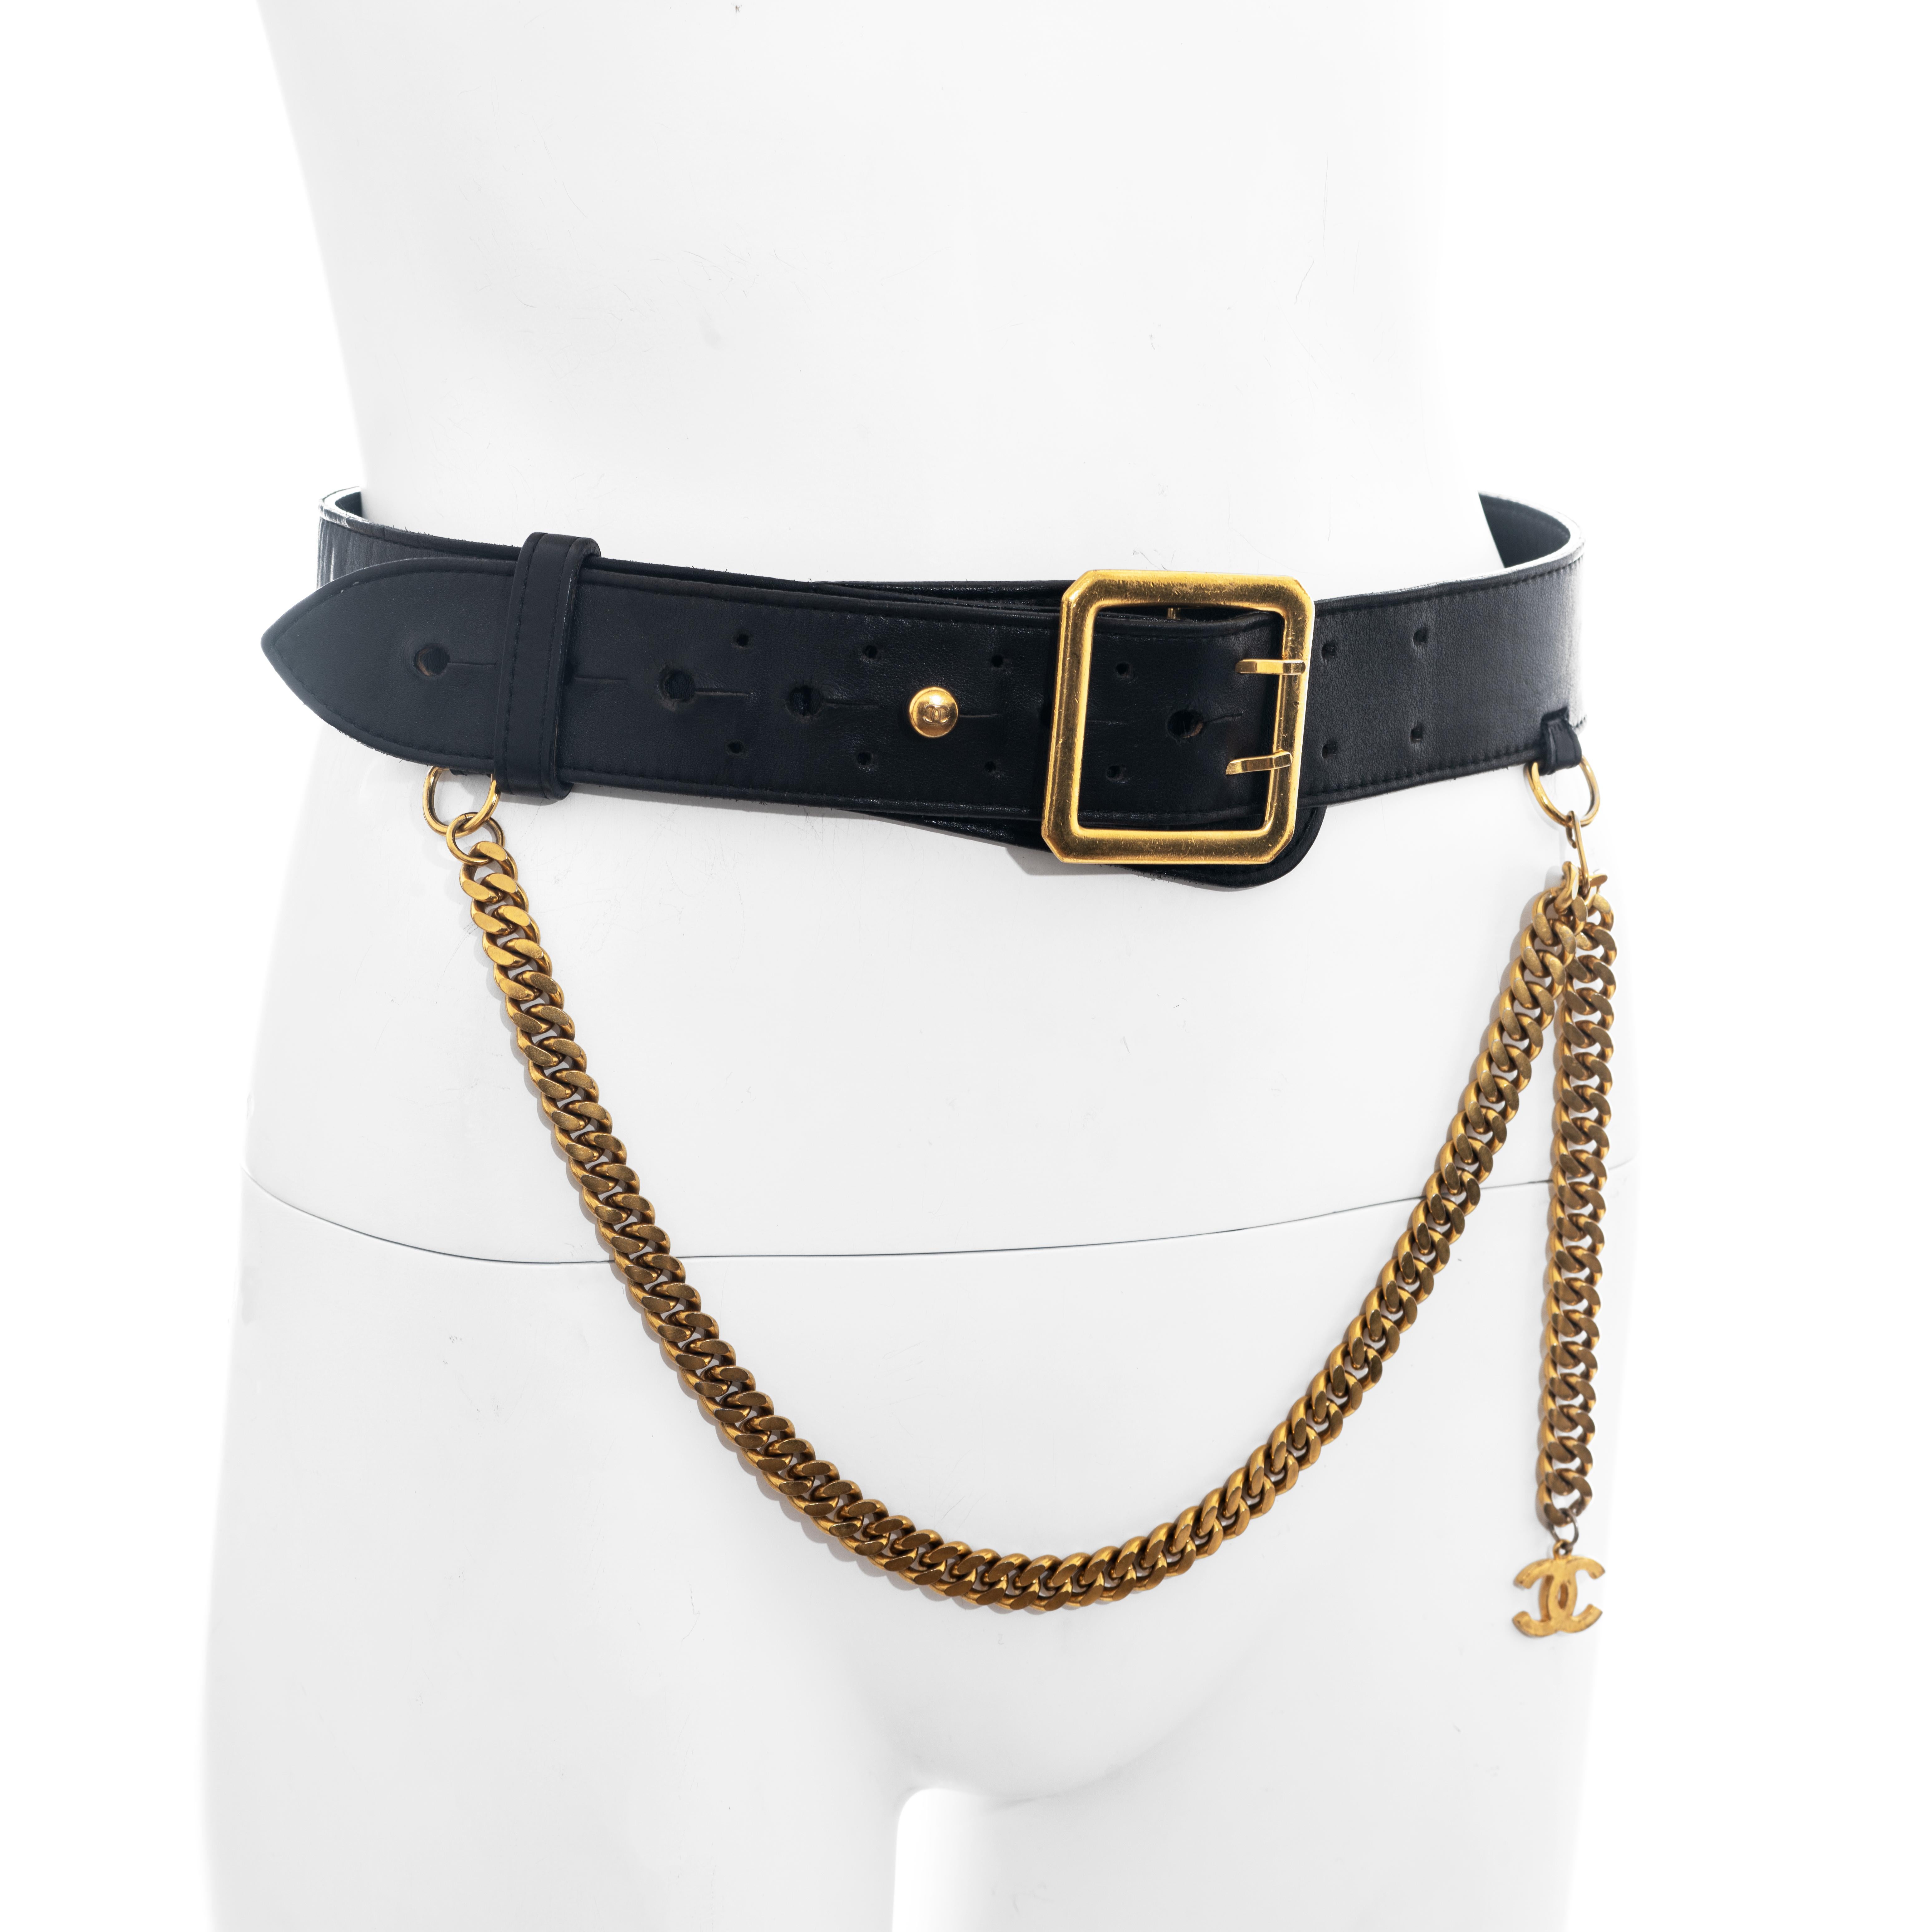 ▪ Chanel black leather belt
▪ Designed by Karl Lagerfeld
▪ Gold chain with Chanel pendent 
▪ Adjustable size
▪ Marked size 75 cm / 30 inches
▪ Fall-Winter 1996